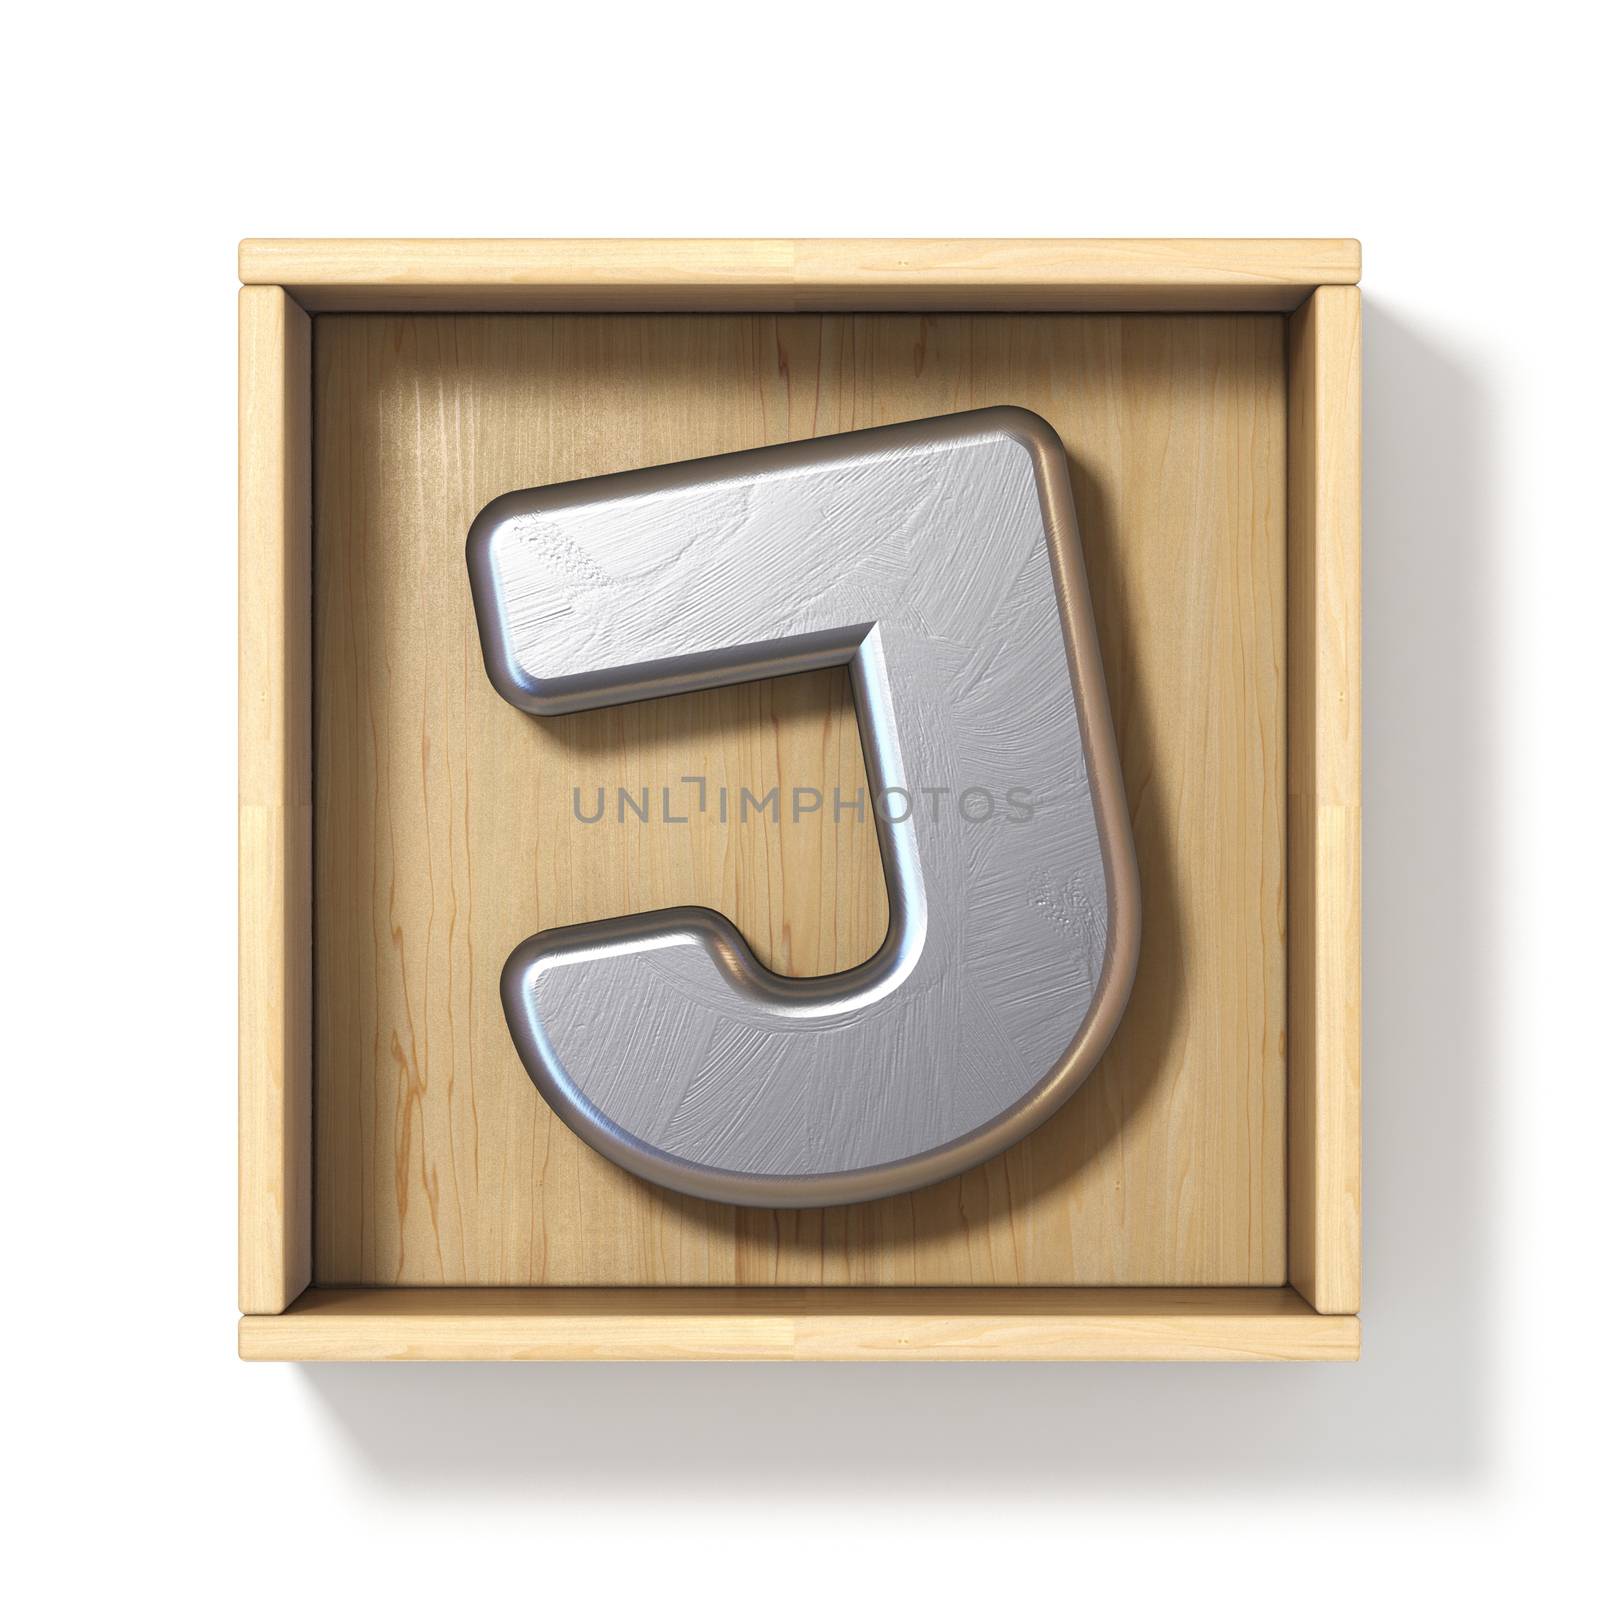 Silver metal letter J in wooden box 3D render illustration isolated on white background